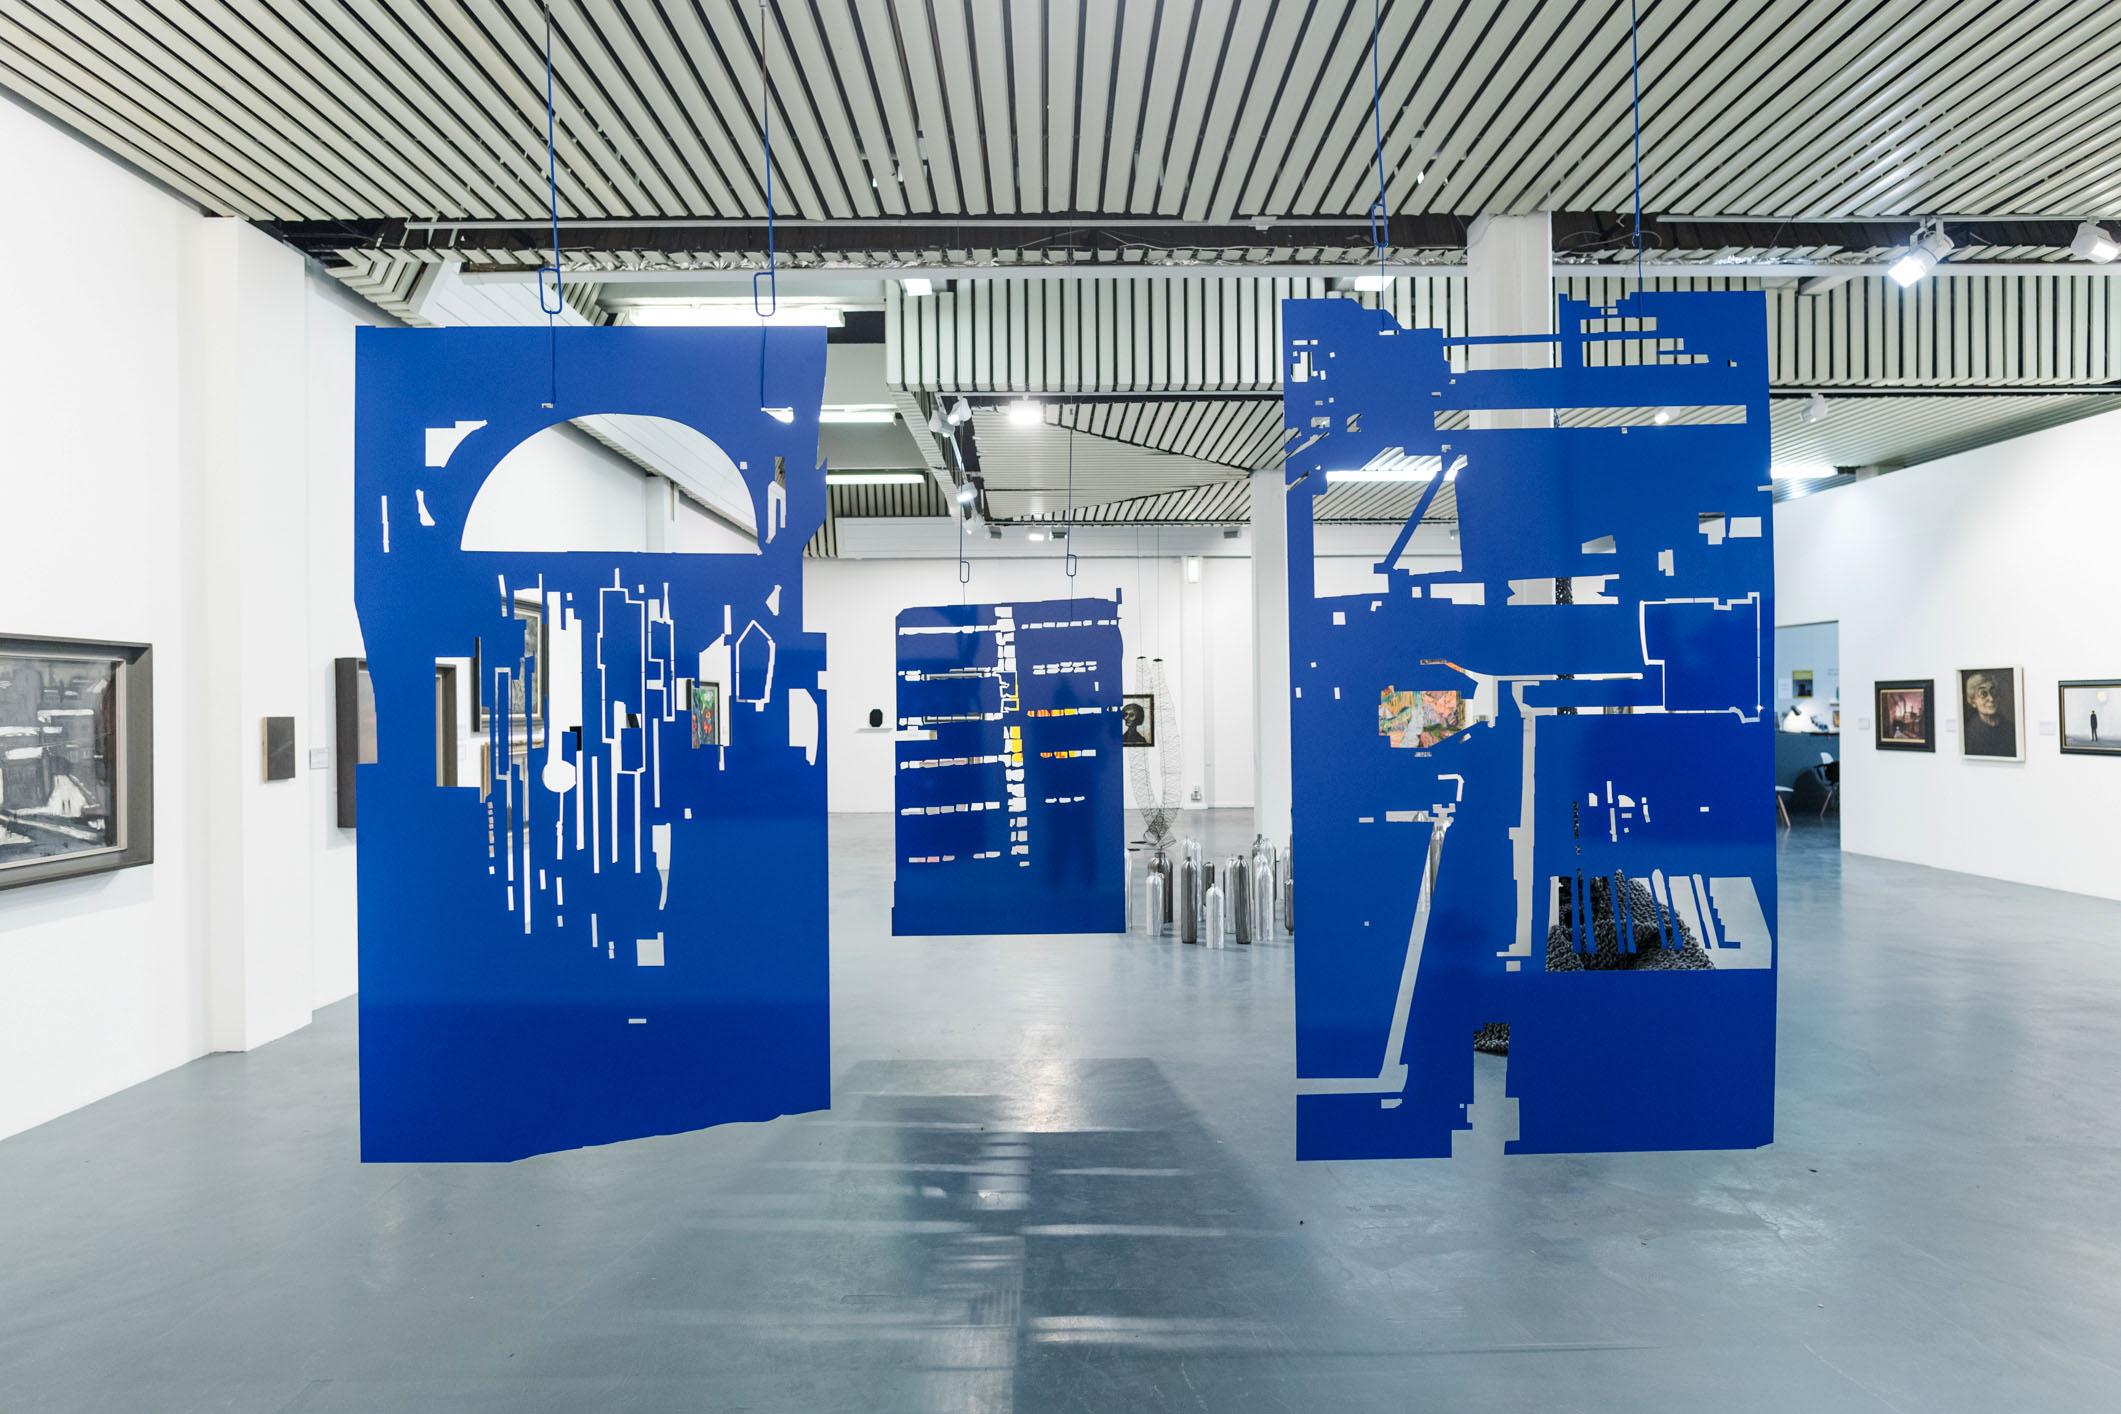 Semi-automatic machine self-portraits<br/>Self-portraits produced by a Trumpf punch machine. Hung on powder coating hooks. <br/>Mild steel sheet and powder coating.<br/> Largest panel 230 x 165 x 0.5 cm. 2019. <br/> Each panel is in an edition of 3. Installation at the Turnpike Gallery, Leigh UK. Works produced as part of Return to Ritherdon, a project based on a two-year artist placement at Ritherdon & Co Ltd, a manufacturer or steel enclosures based in Darwen Lancashire. Images by Livia Lazar. <br>Editions acquired by Arts Council Collection and Government Art Collection. 